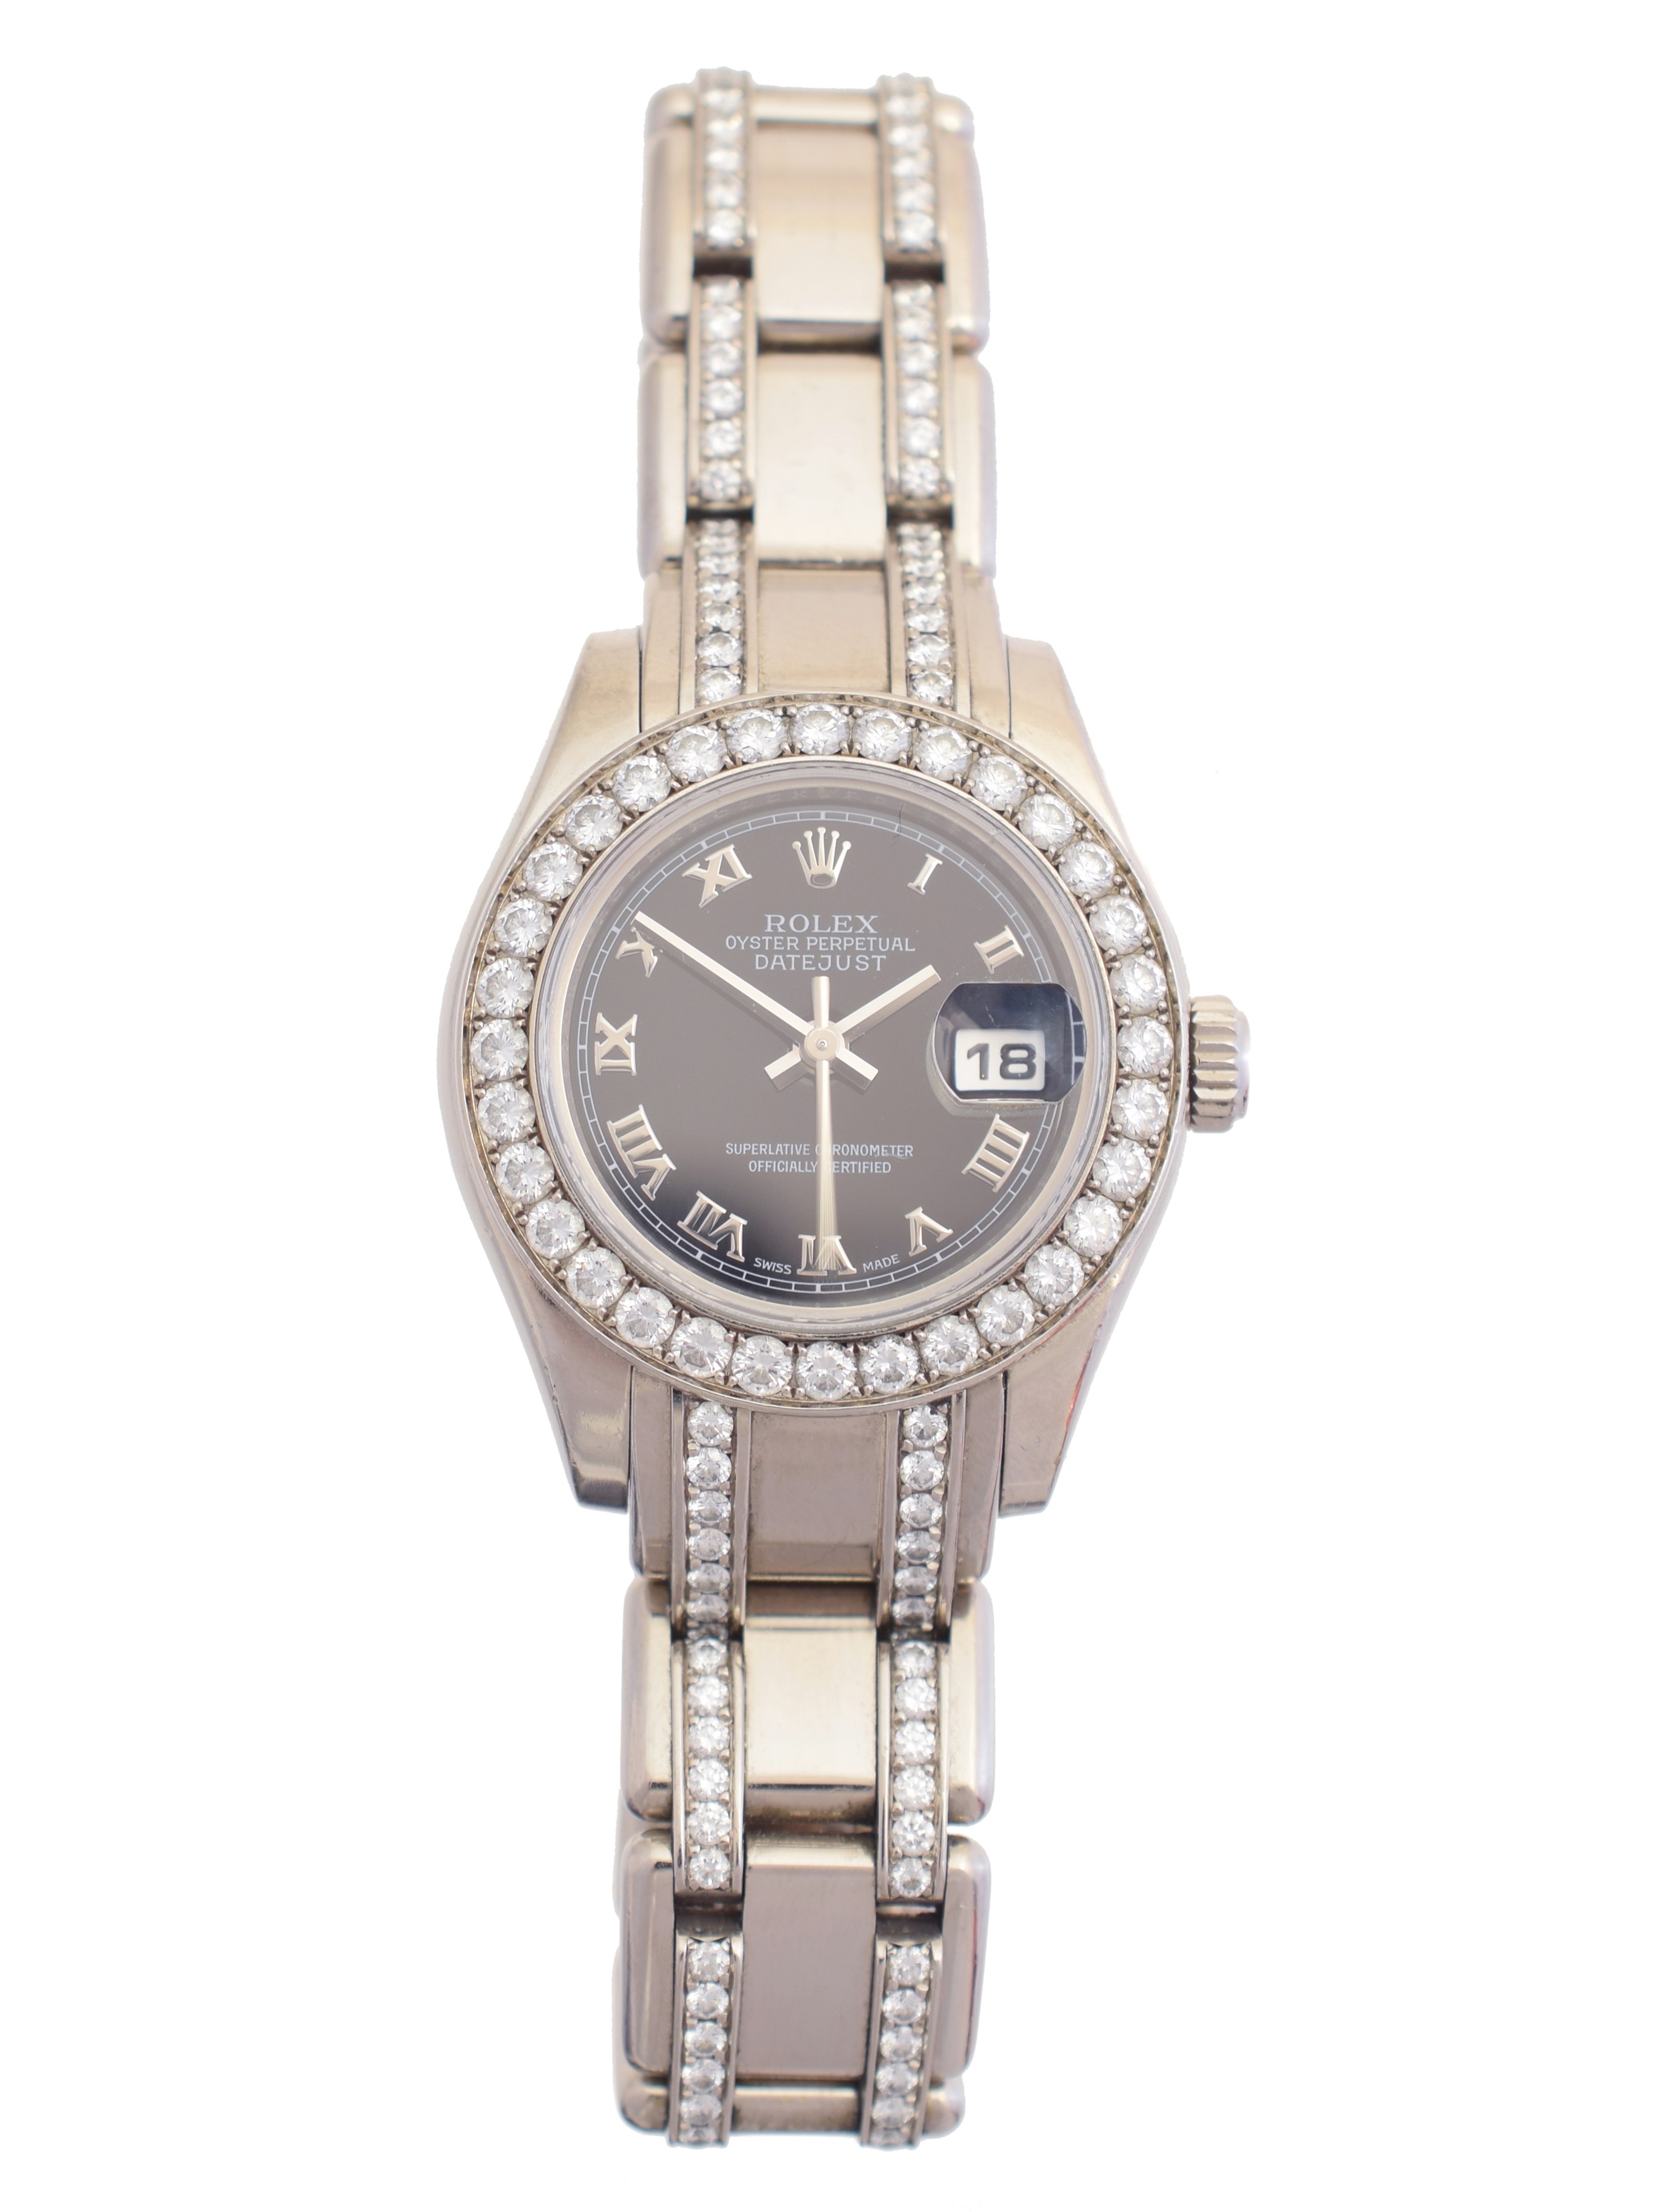 A ladies 18ct gold and diamond Rolex Oyster Perpetual Datejust Pearlmaster wristwatch, circa 2006-7, the circular signed black dial with Roman numeral hour markers, date aperture to 3, with diamond set bezel and Pearlmaster bracelet with crown clasp, model no. 80299, Z961180, case diameter 29mm, gross weight 111g, with box and papers.